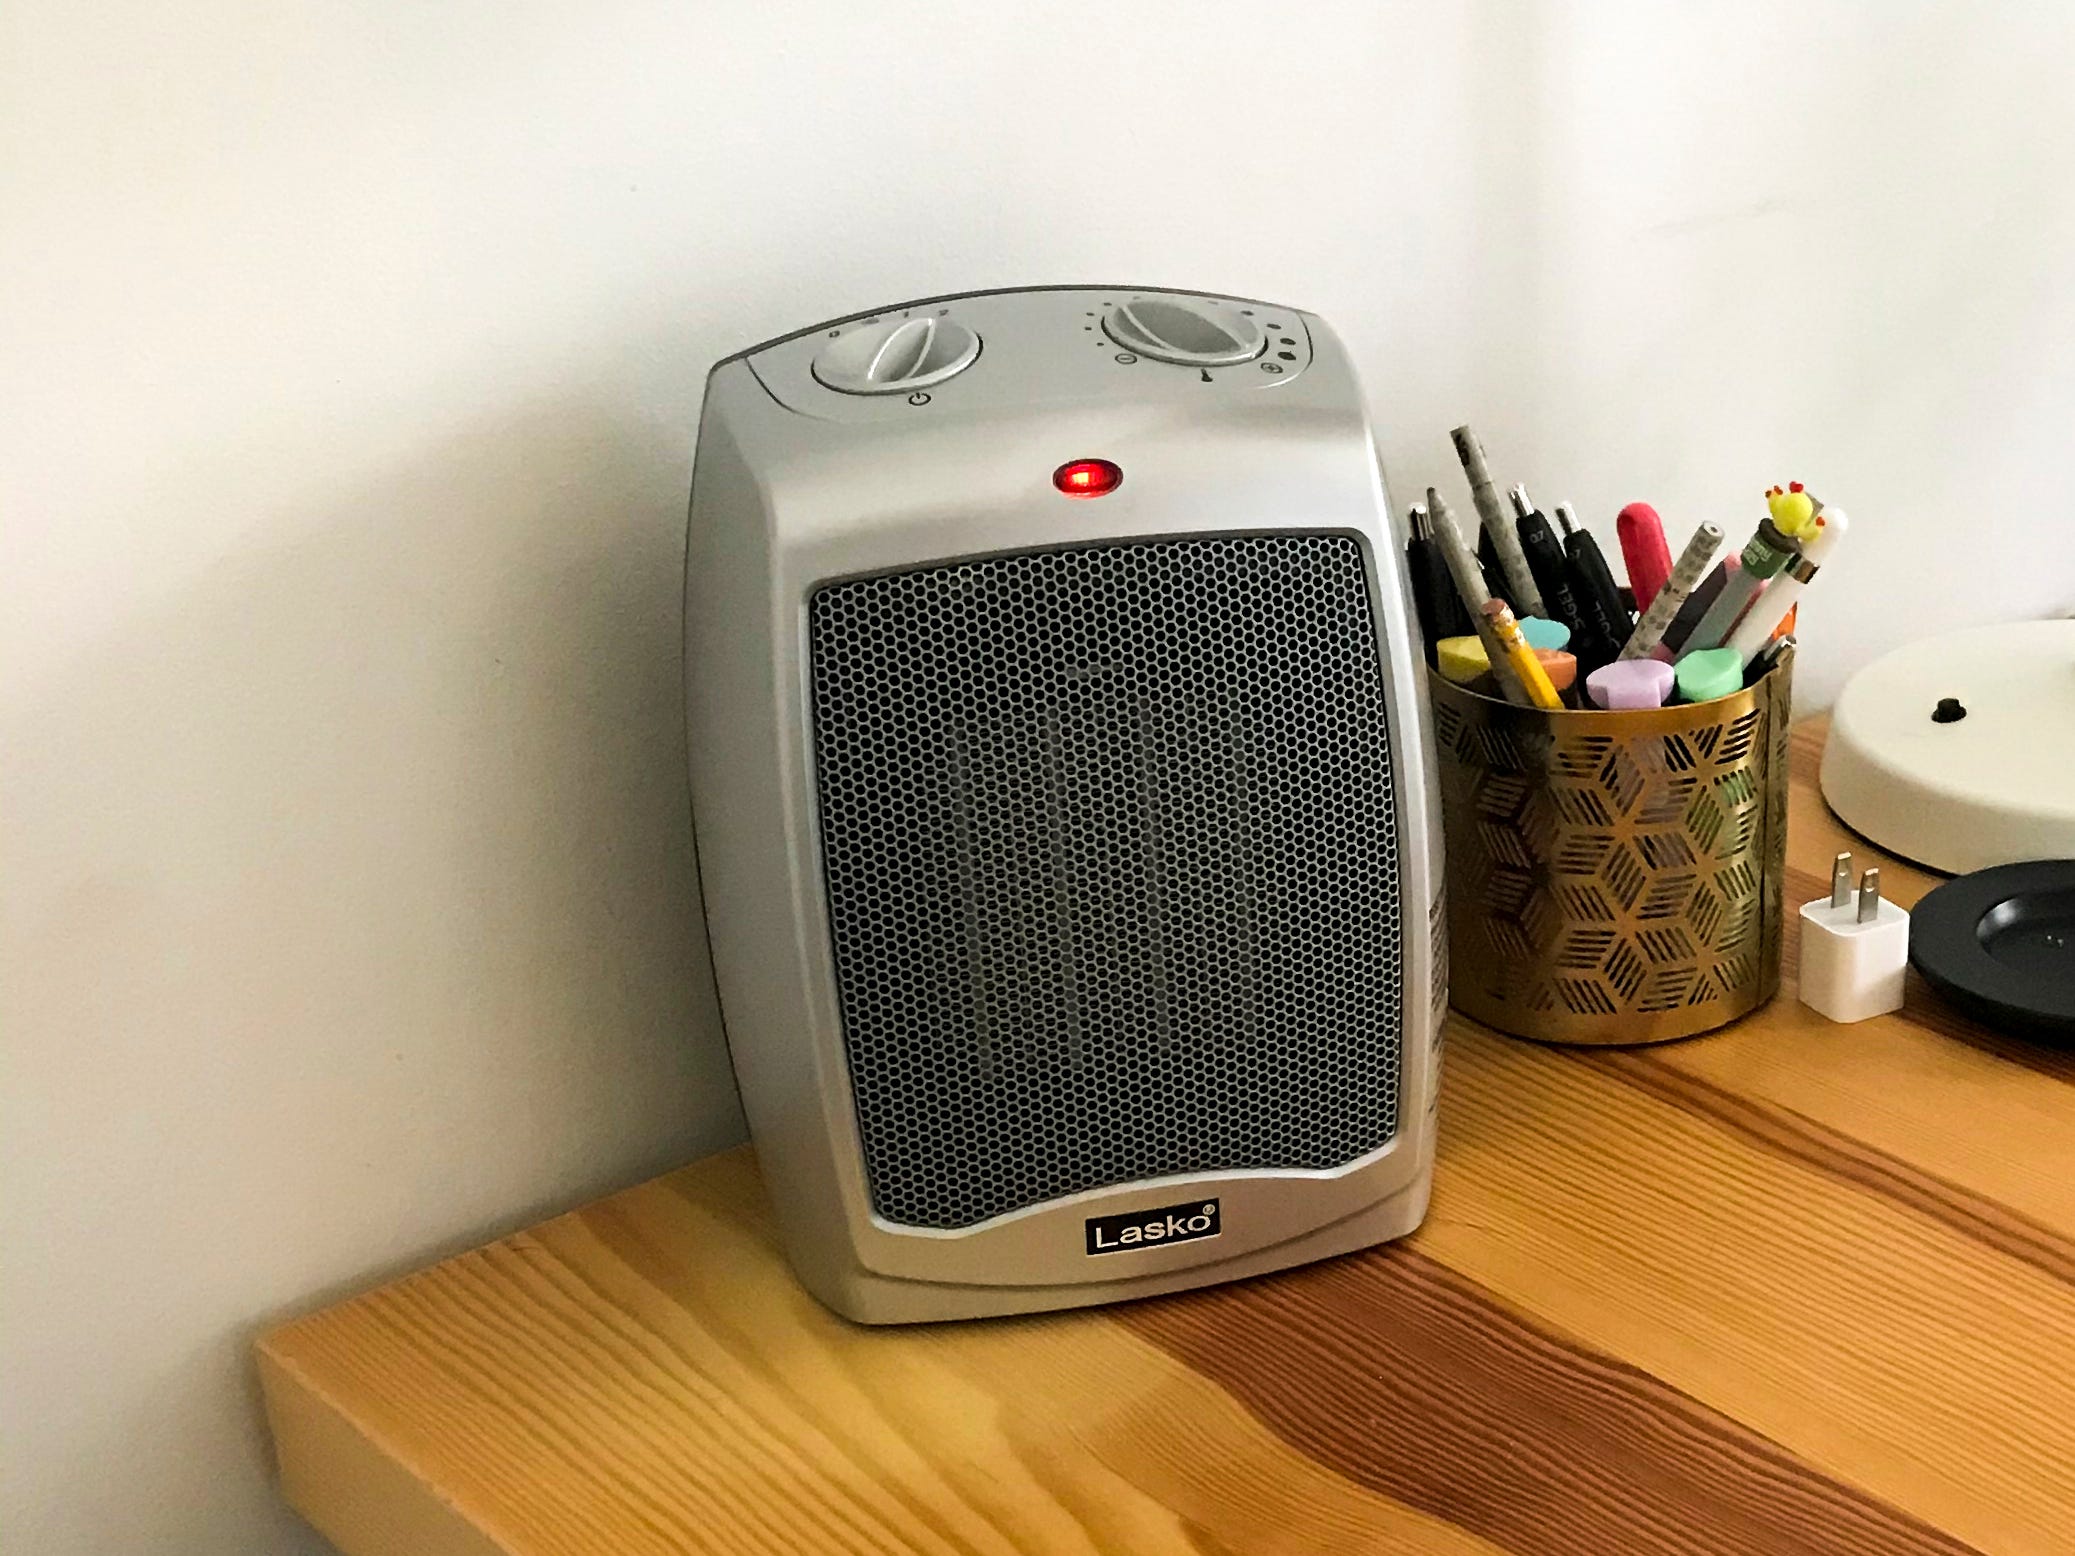 The Lasko 754200 Ceramic Portable Space Heater, the best space heater overall in 2022, is displayed on a wood table next to a container of writing tools.